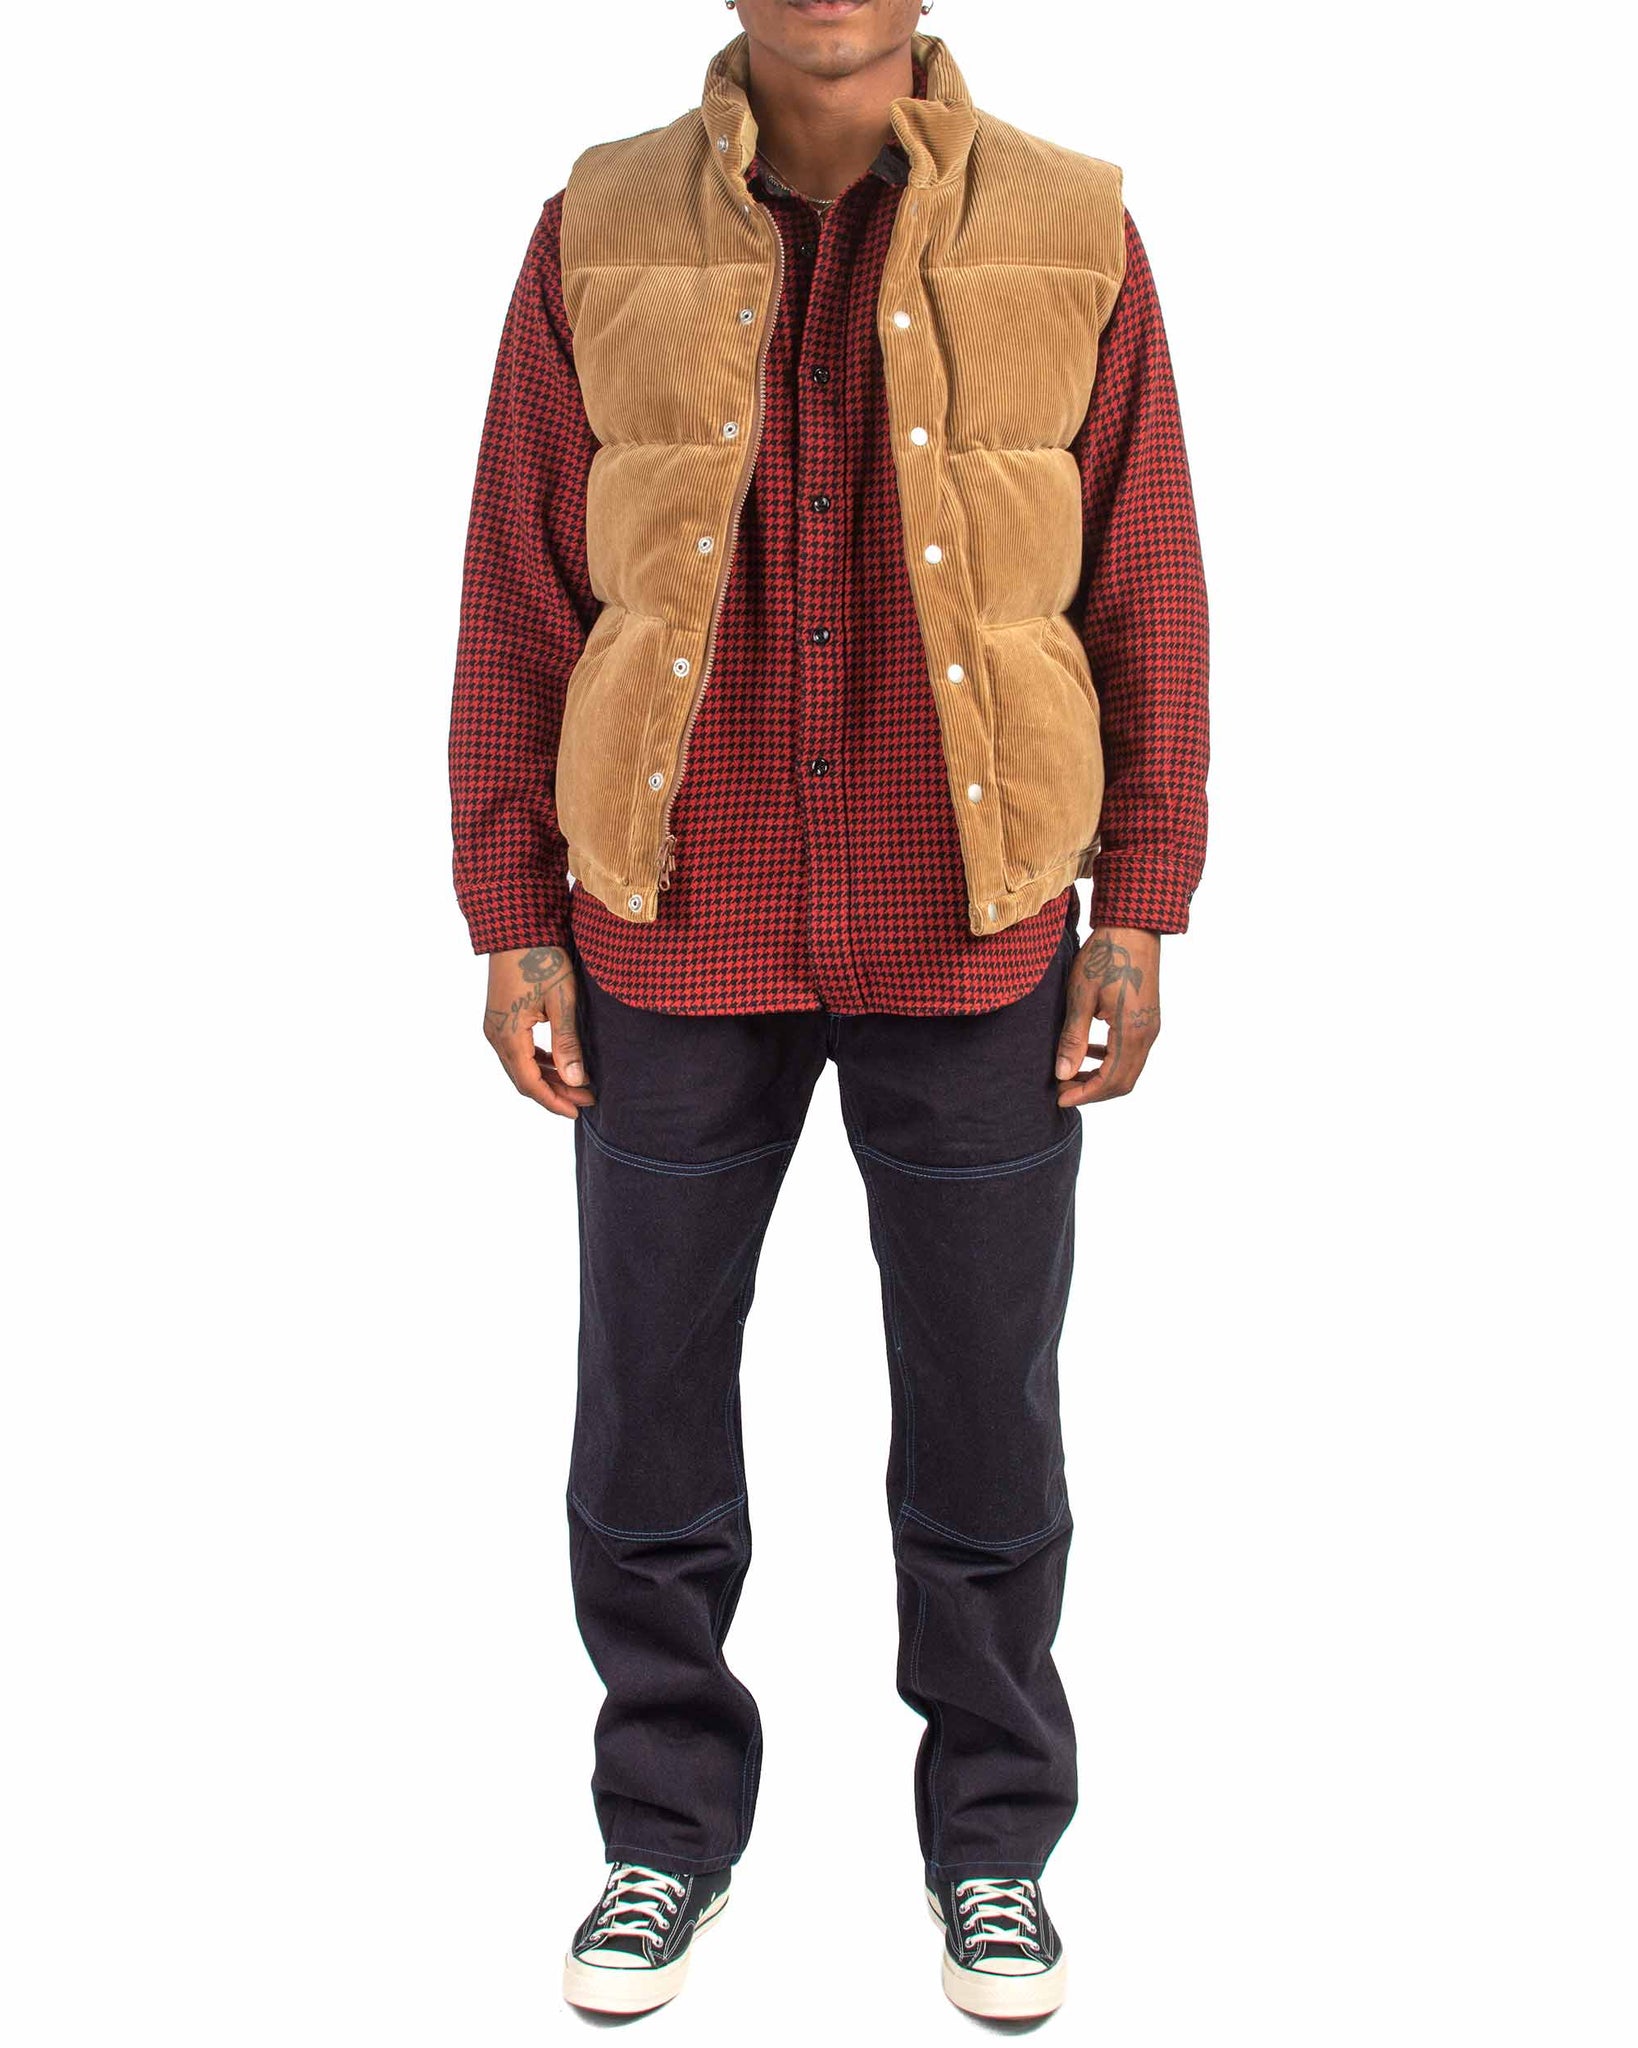 The Real McCoy's MJ21124 Corduroy Down Vest Brown